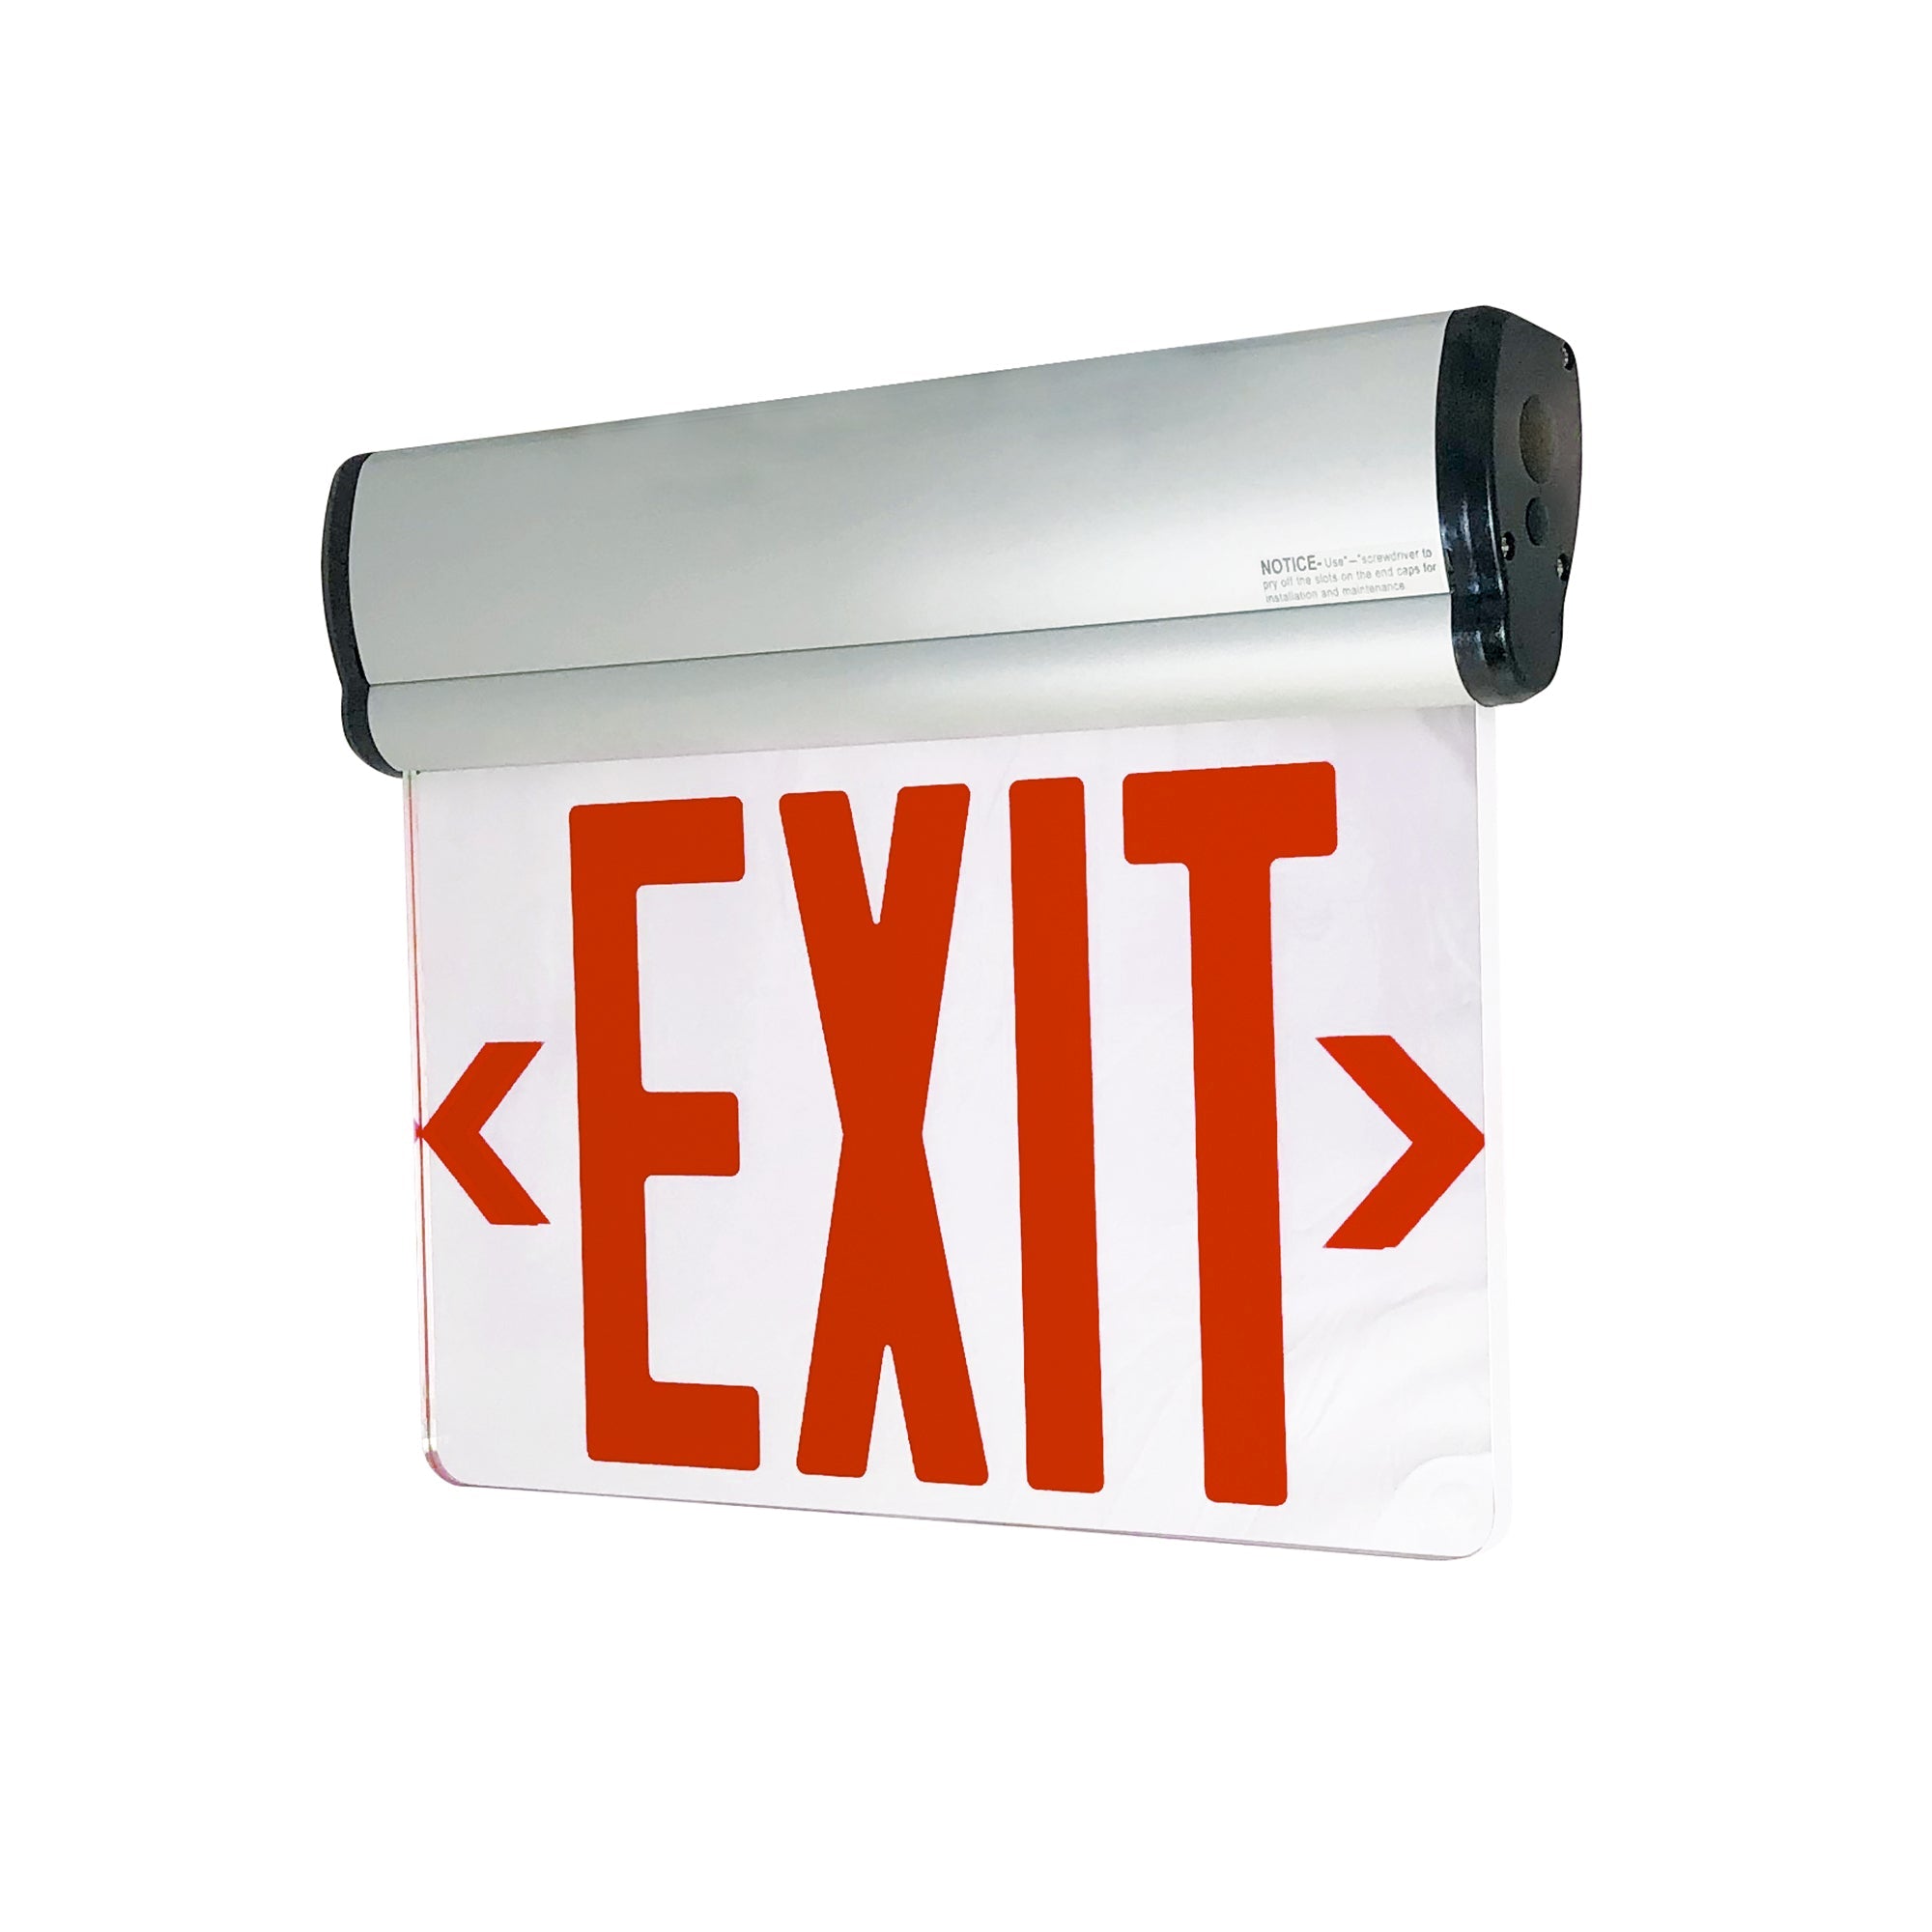 Nora Lighting NX-811-LEDR2MA - Exit / Emergency - Surface Adjustable LED Edge-Lit Exit Sign, 2 Circuit, 6 Inch Red Letters, Double Face / Mirrored Acrylic, Aluminum Housing